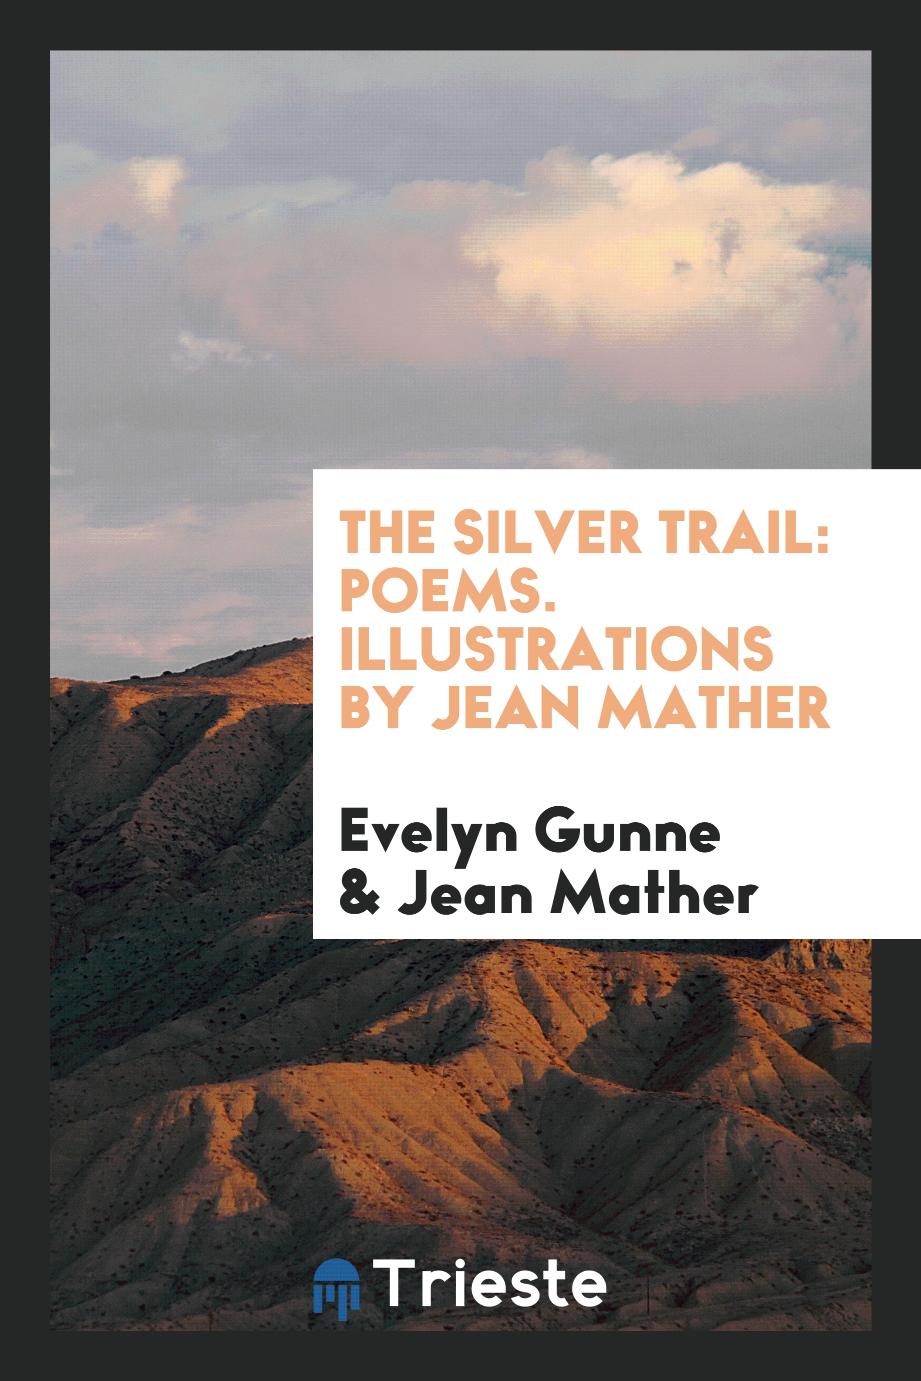 The Silver Trail: Poems. Illustrations by Jean Mather